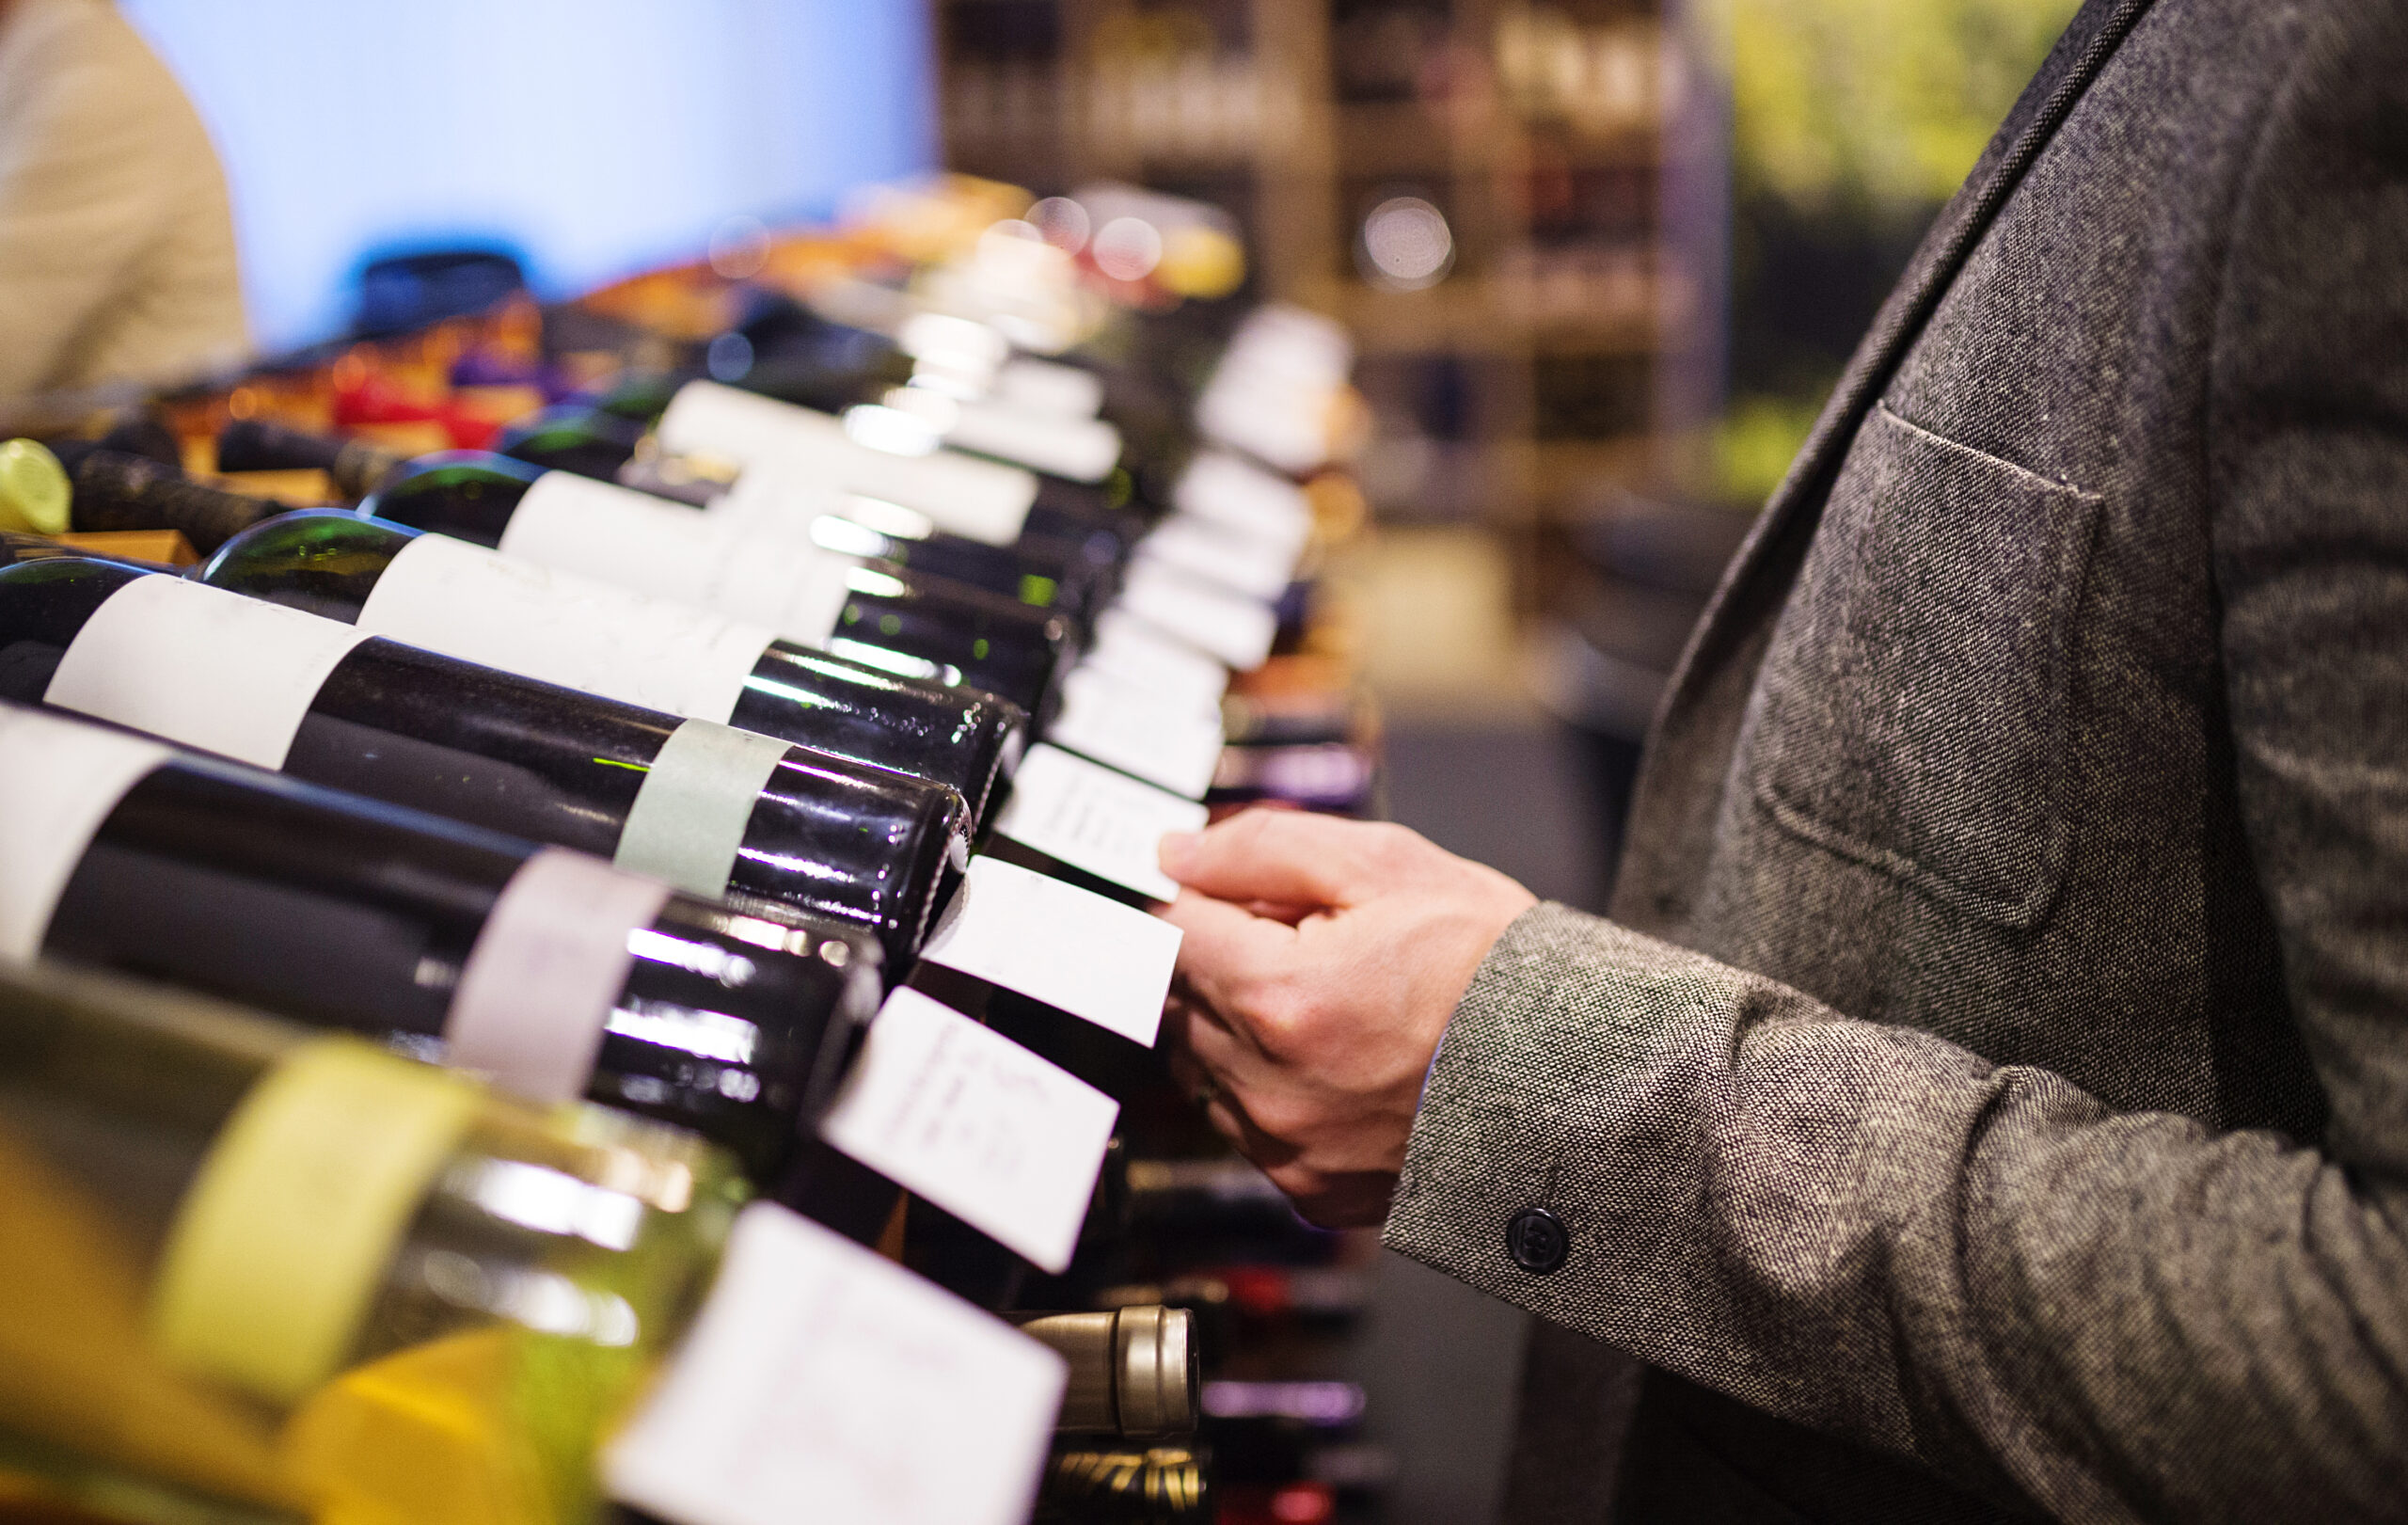 Man in wine shop choosing which wine to purchase